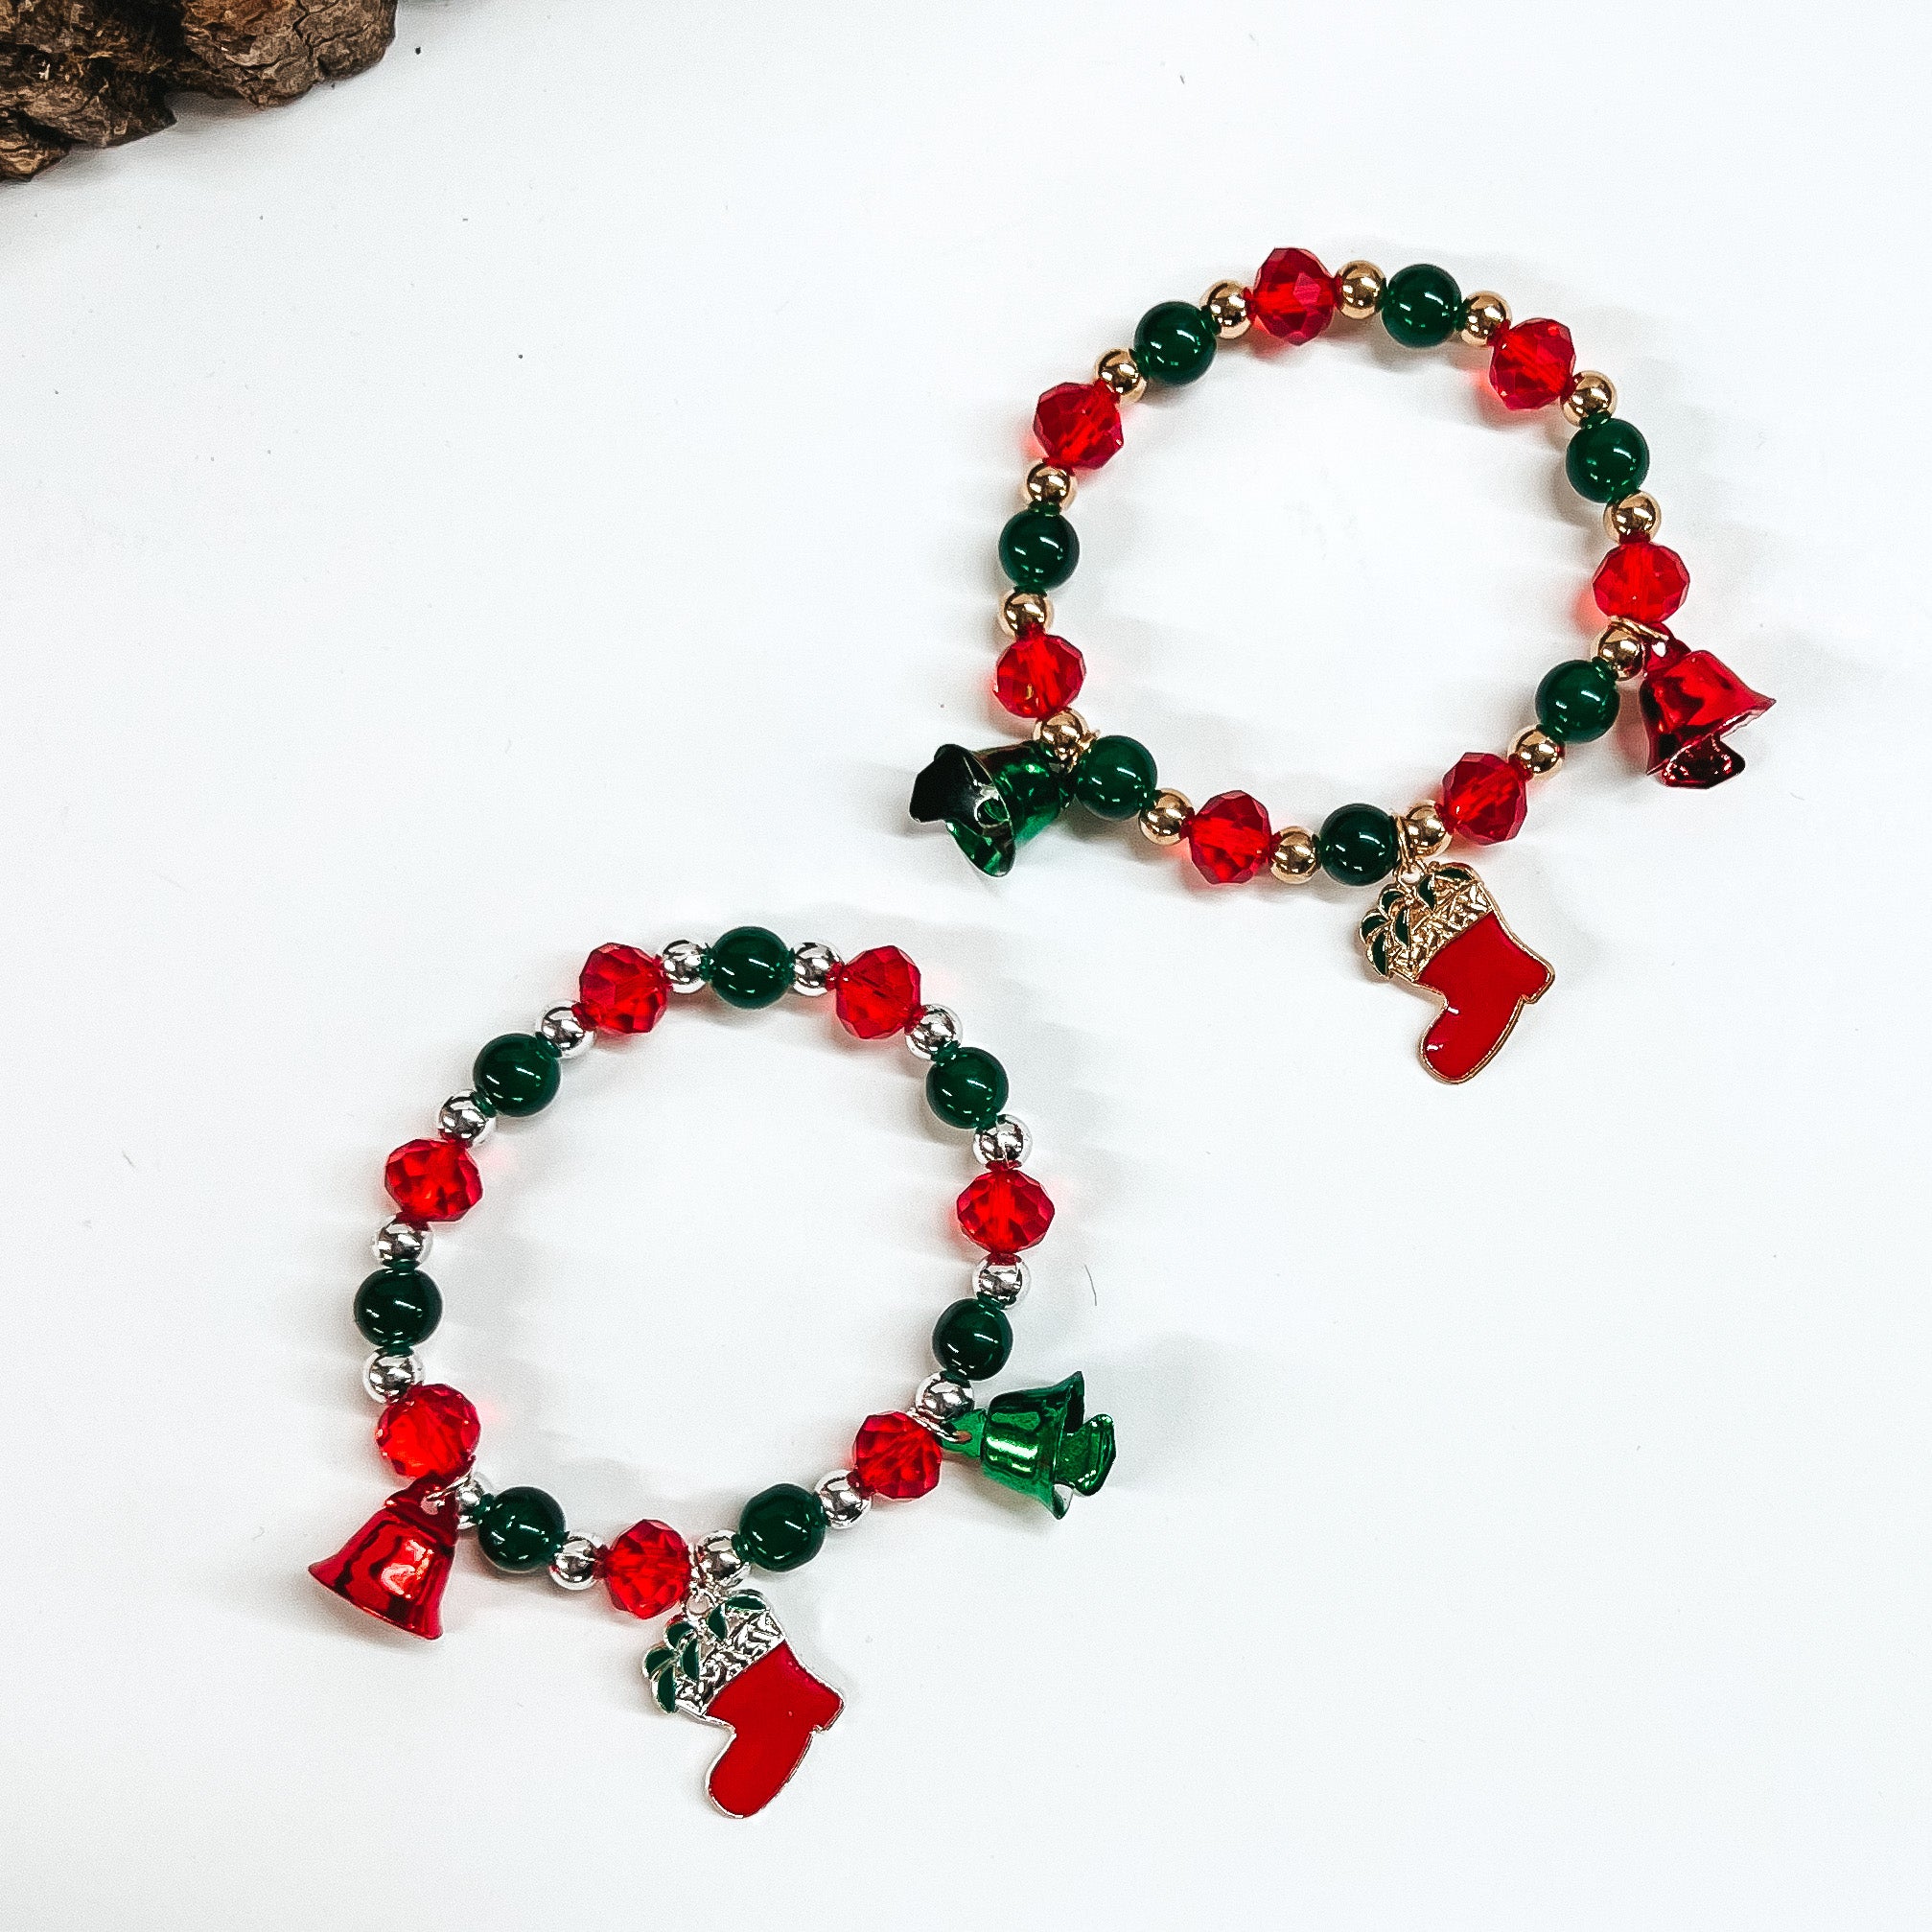 There are two red and green beaded bracelets with charms. The bottom one has silver circle beads and the top on ehas gold circle beads. Both bracelets are taken on a white background with a slab of wood in the back as decor.